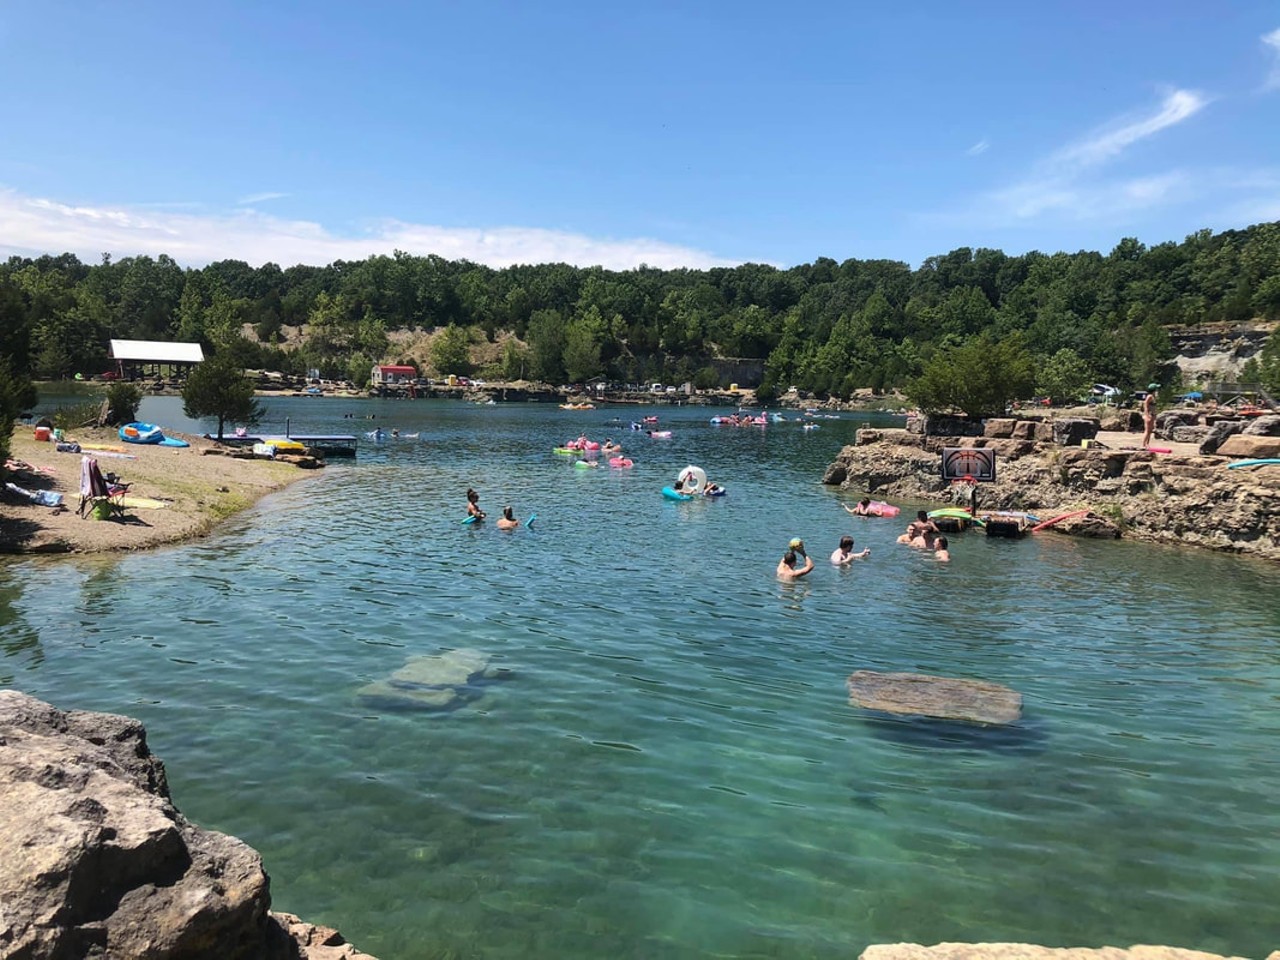 The Quarry
2201 Fendley Mill Rd  
This 18 and up only quarry is perfect for lounging, swimming and adventuring. You can snorkel, paddleboard, pedal boat, kayak, canoe, play sand volleyball or relax in the water. It&#146;s $10 to reserve your spot and $25 for admission. Photo via  The Quarry